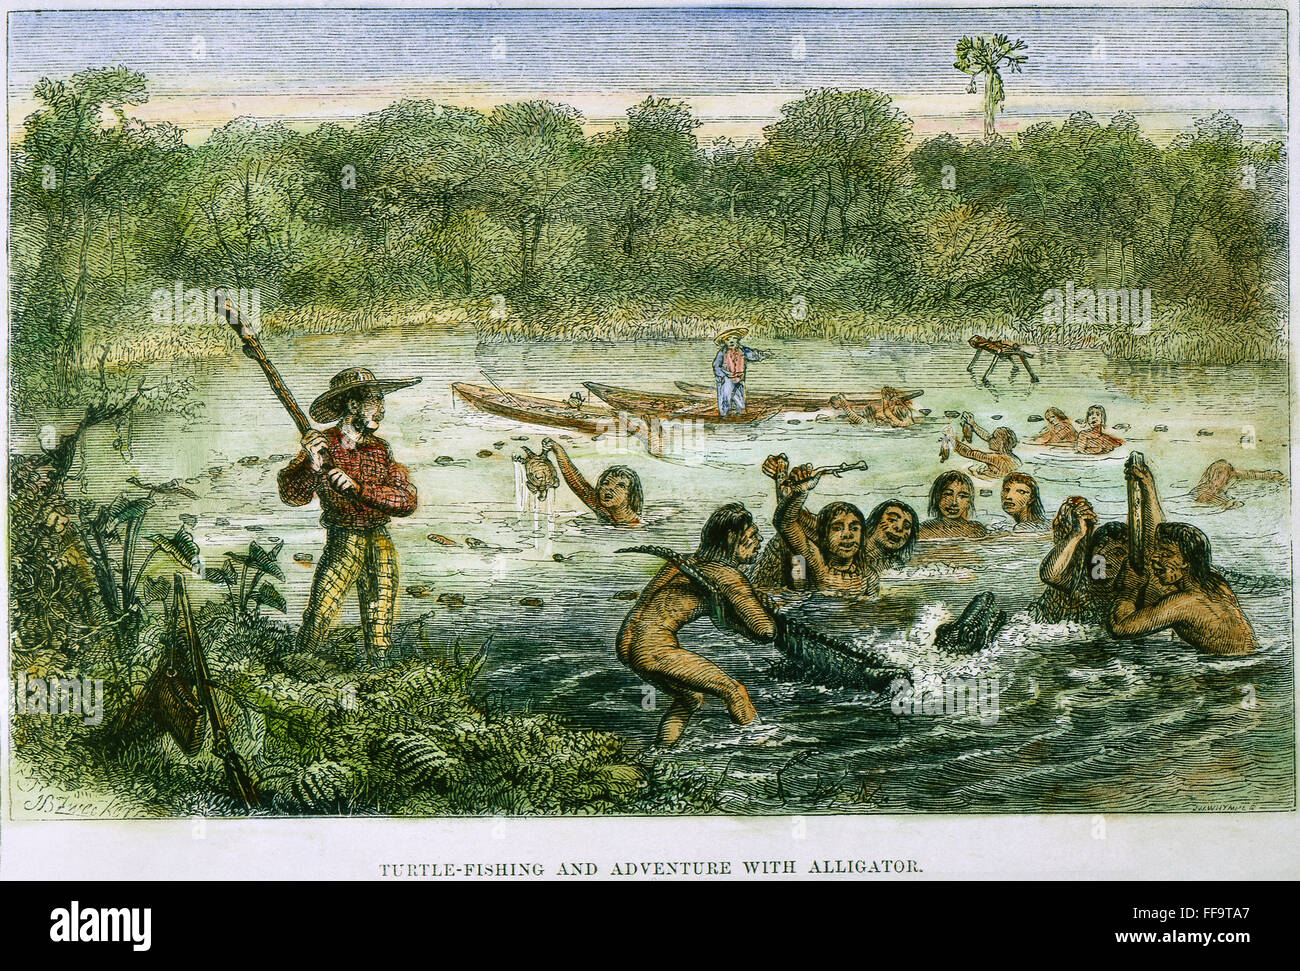 HENRY WALTER BATES /n(1825-1892). At left, holding a club watching Amazonian native Indians capturing turtles and a cayman. Wood engraving from Bates 'The Naturalist on the River Amazons,' 1863. Stock Photo